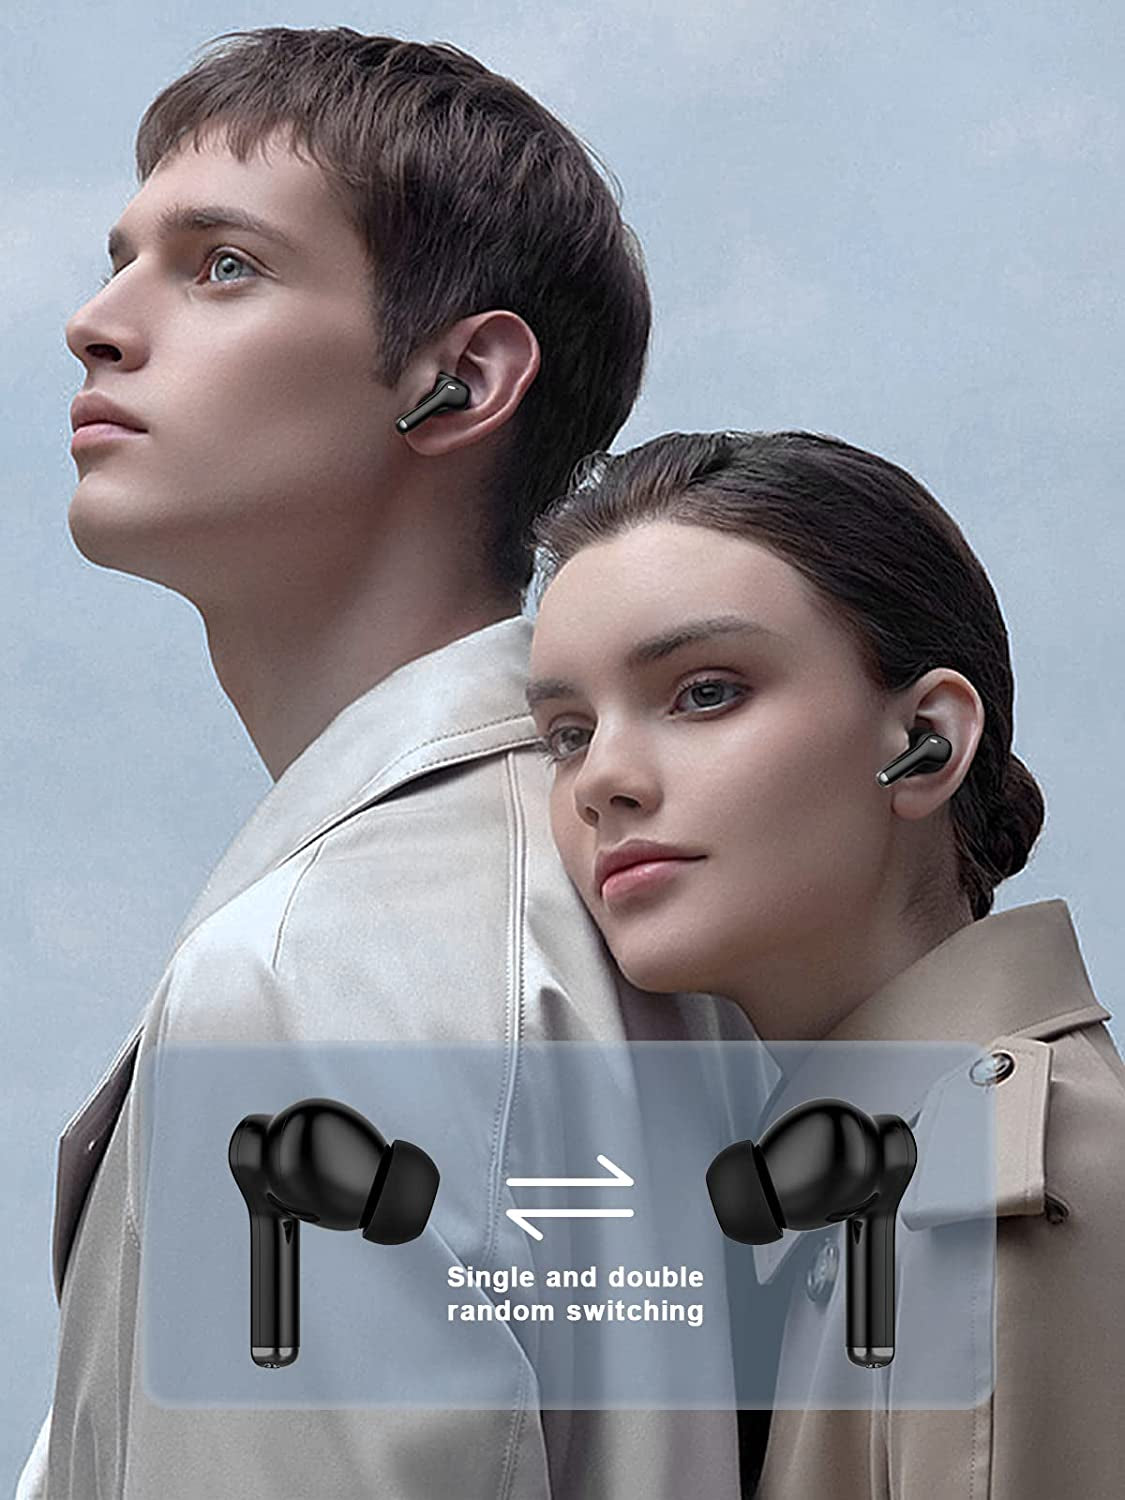 True Wireless Earbuds, Bluetooth 5.2 Wireless Headphones with Environmental Noise Cancellation, Clear Call with 4 Microphones in Ear Earbuds, 3D Stereo Sound, LED Power Display Earphones, Green